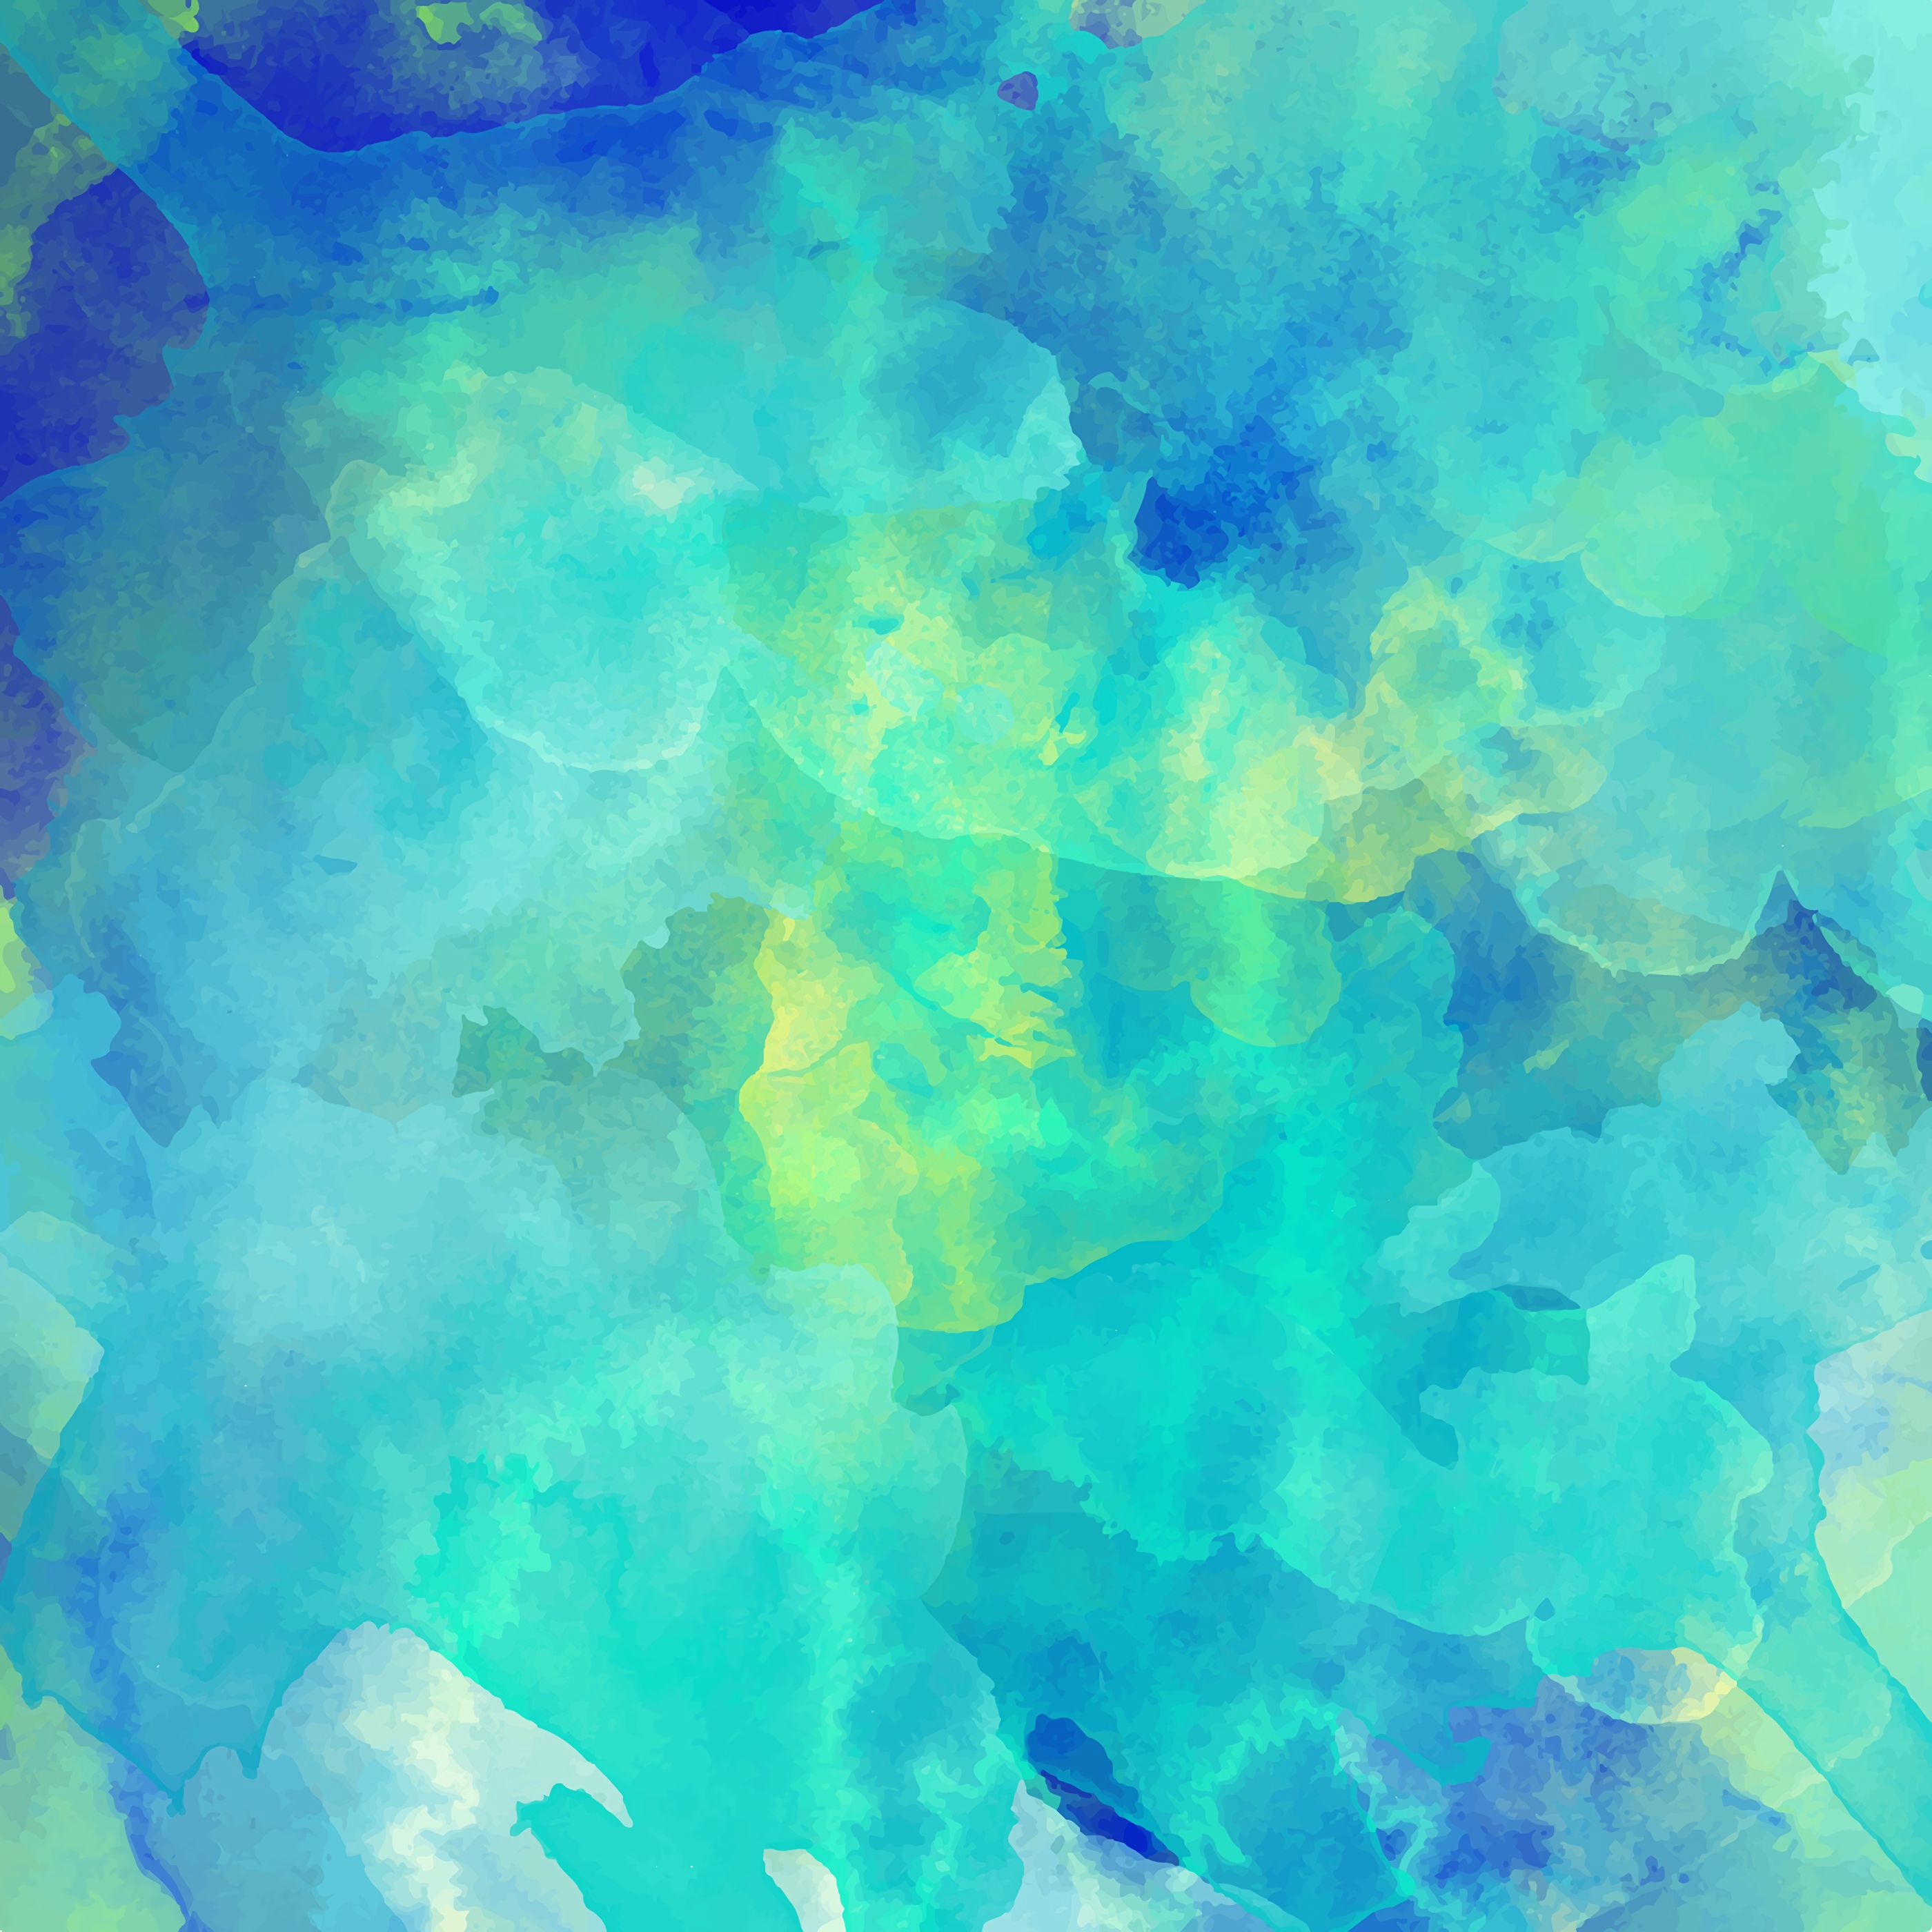 900 Watercolor Background Images Download HD Backgrounds on Unsplash